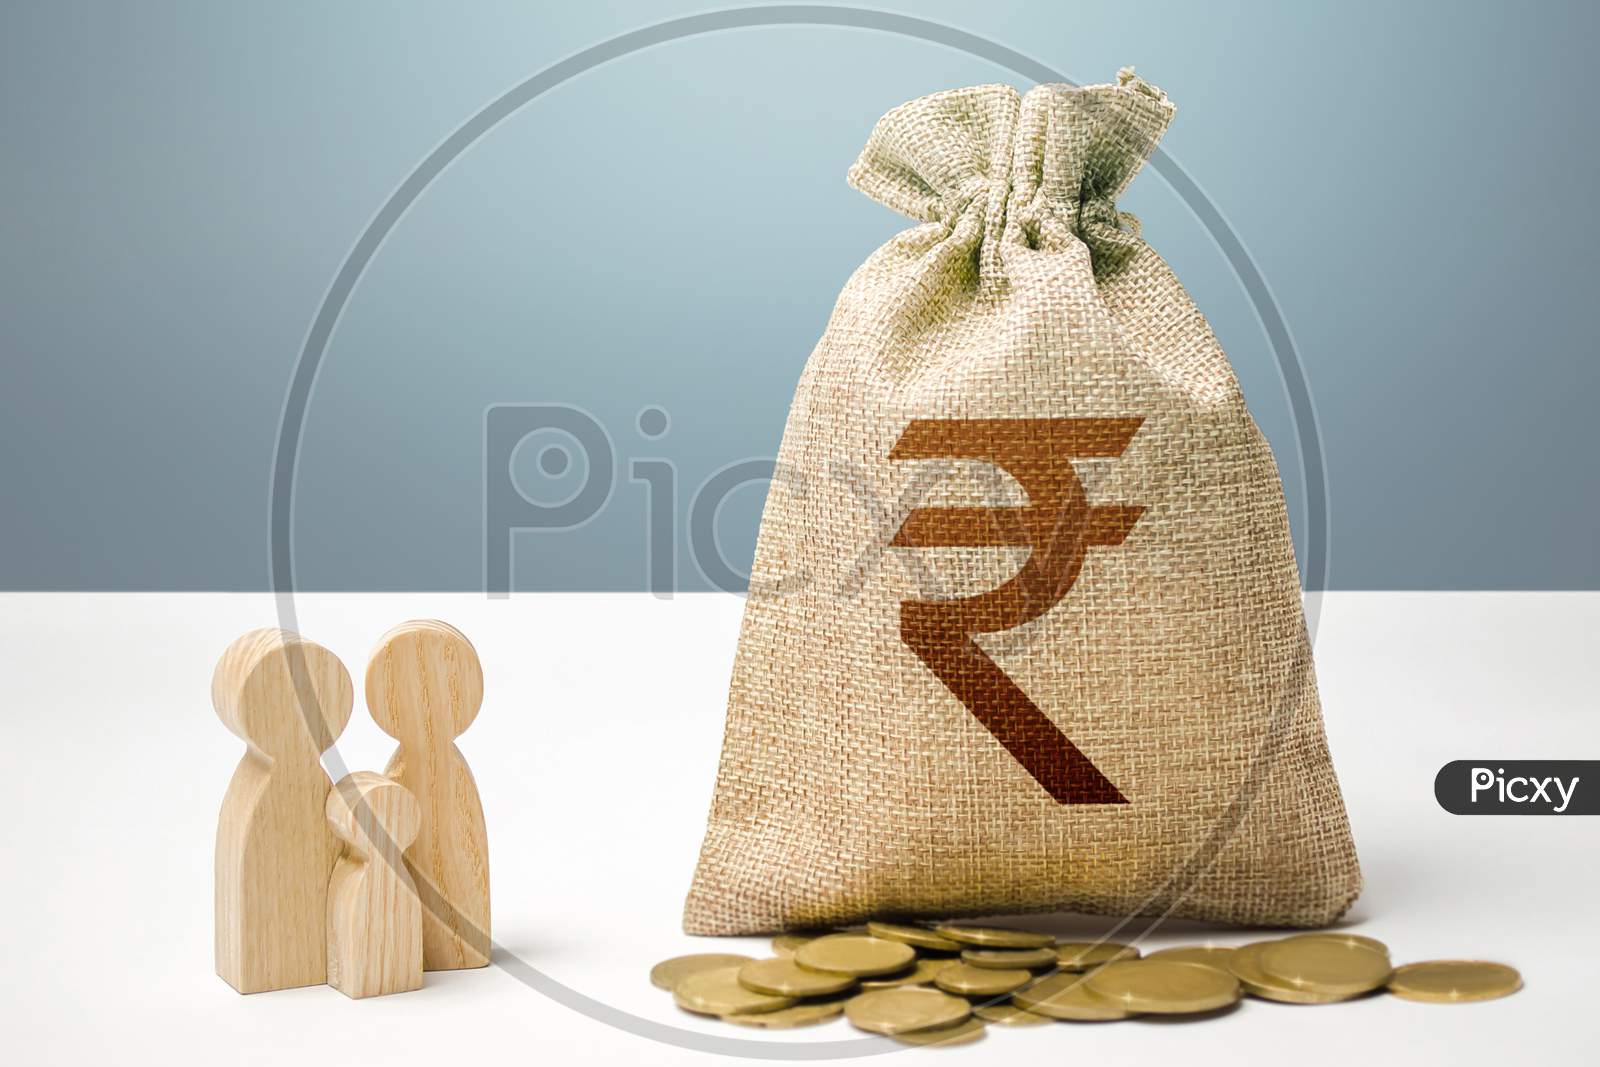 Indian Rupee Money Bag With Money And Family Figurines. Financial Support For Social Institutions. Providing Assistance To Citizens. Investments In Human Capital, Culture And Social Projects.